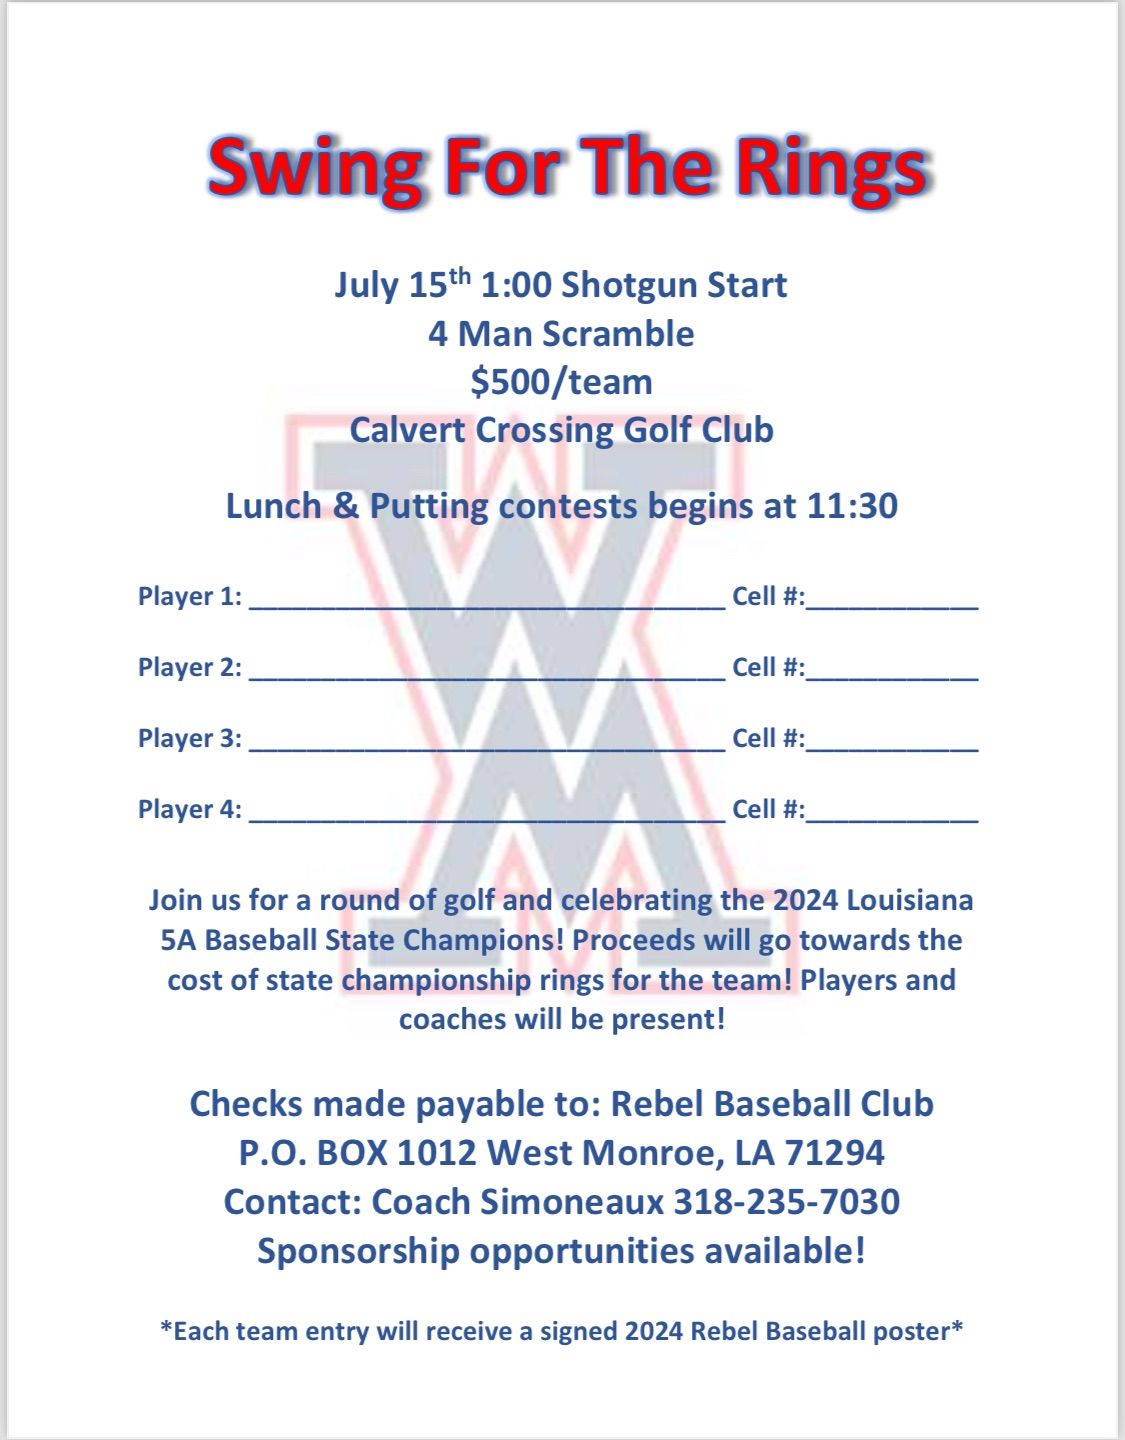 Swing For The Rings